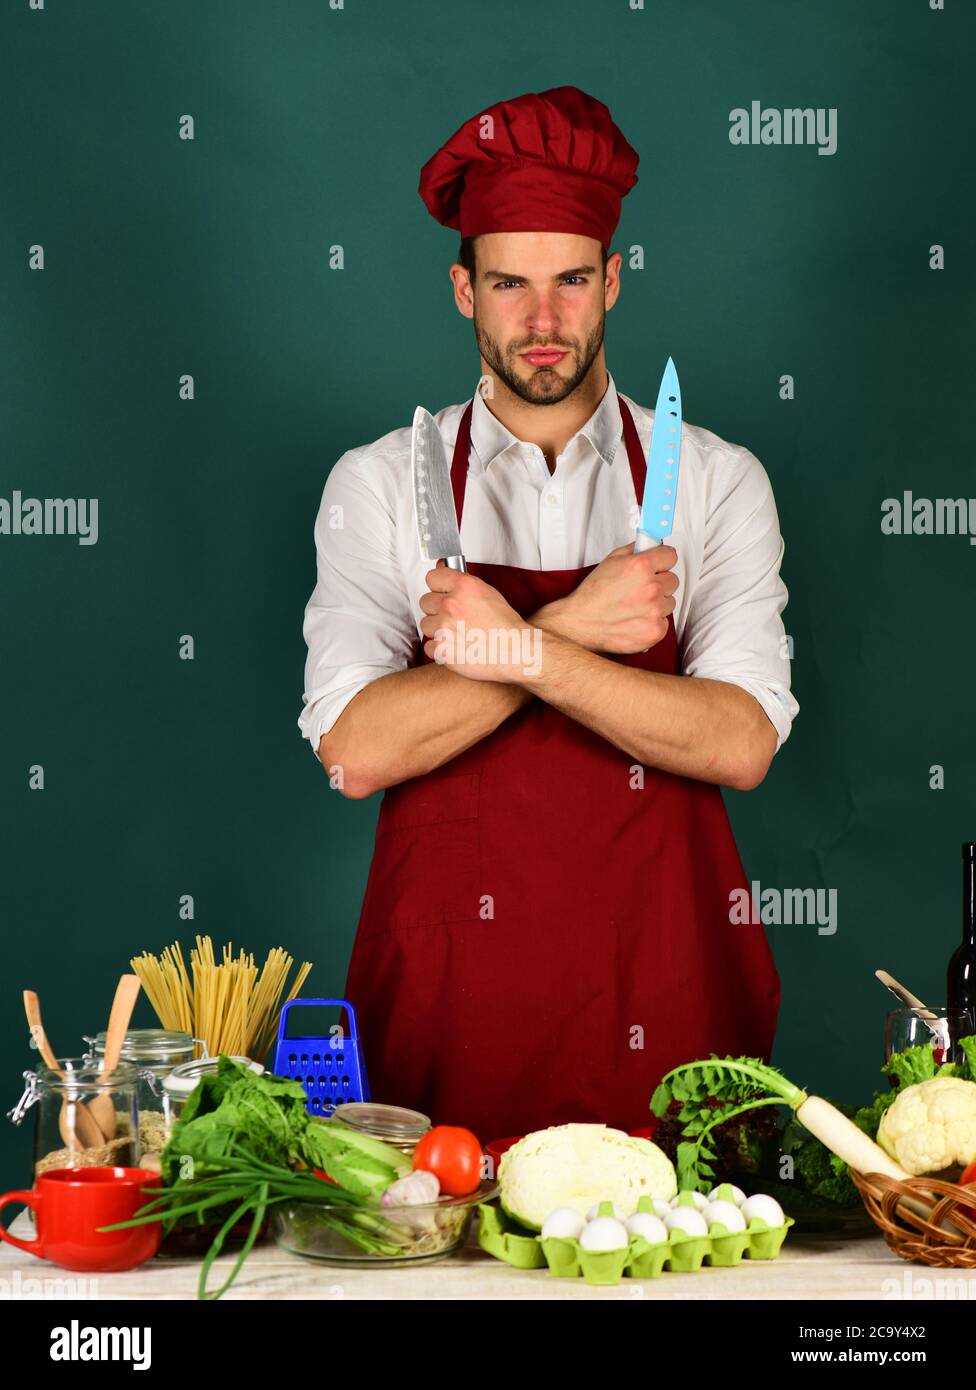 https://c8.alamy.com/comp/2C9Y4X2/man-in-cook-hat-and-apron-chef-with-confident-face-holds-blue-and-metal-knives-on-dark-green-background-cook-works-in-kitchen-near-table-with-vegeta-2C9Y4X2.jpg